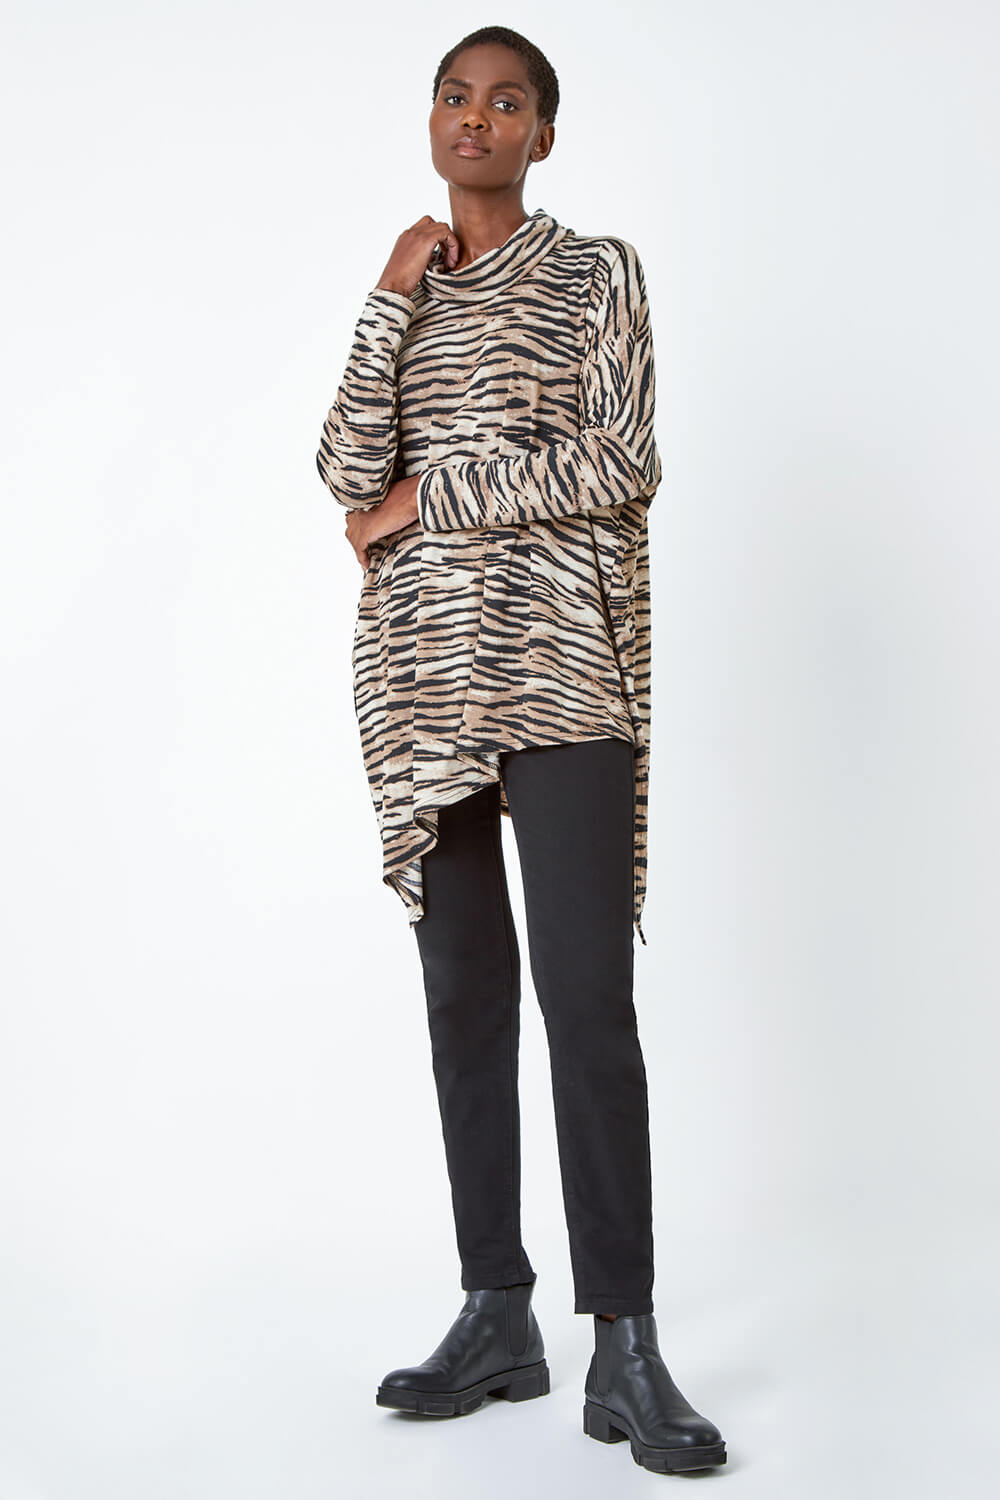 Natural  Animal Print Asymmetric Stretch Top, Image 2 of 5